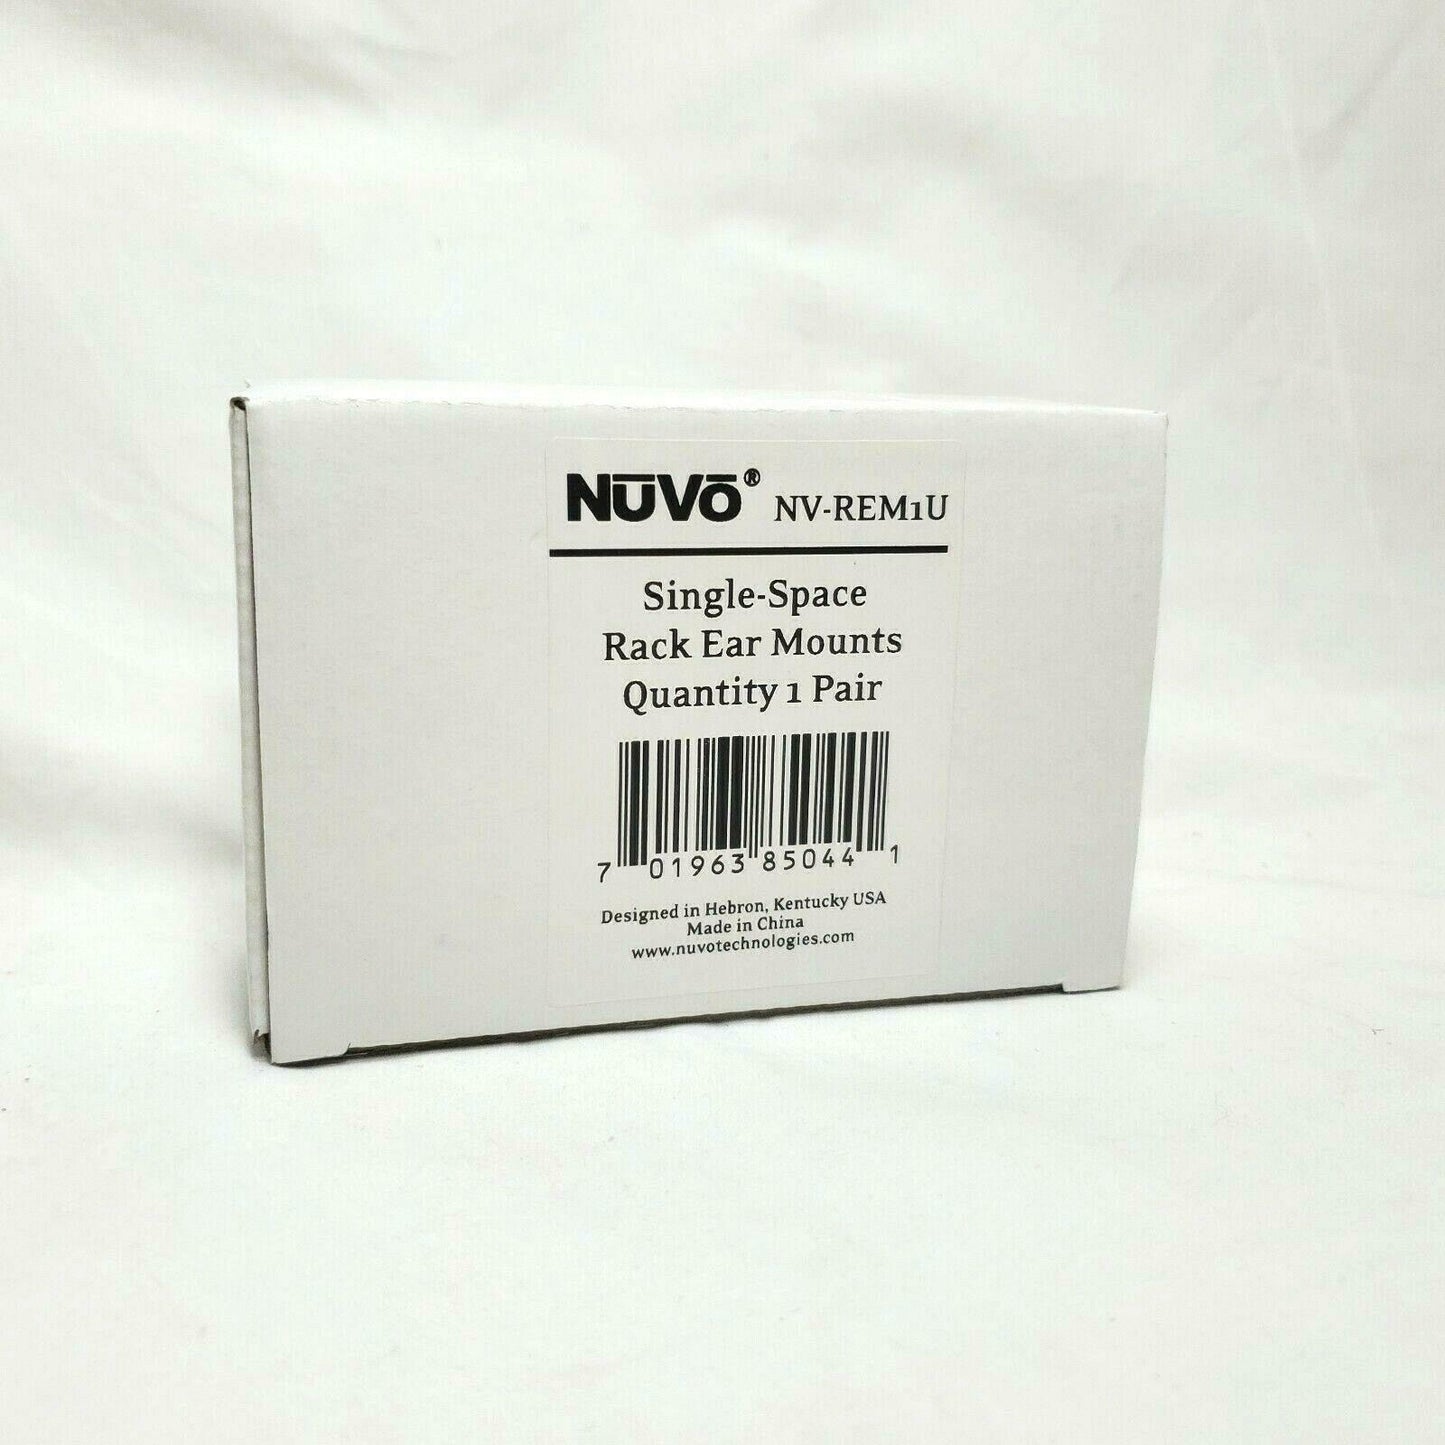 NuVo NV-REM1U Sigle Space Rack Ear Mounts (Pair) **BRAND NEW IN BOX**